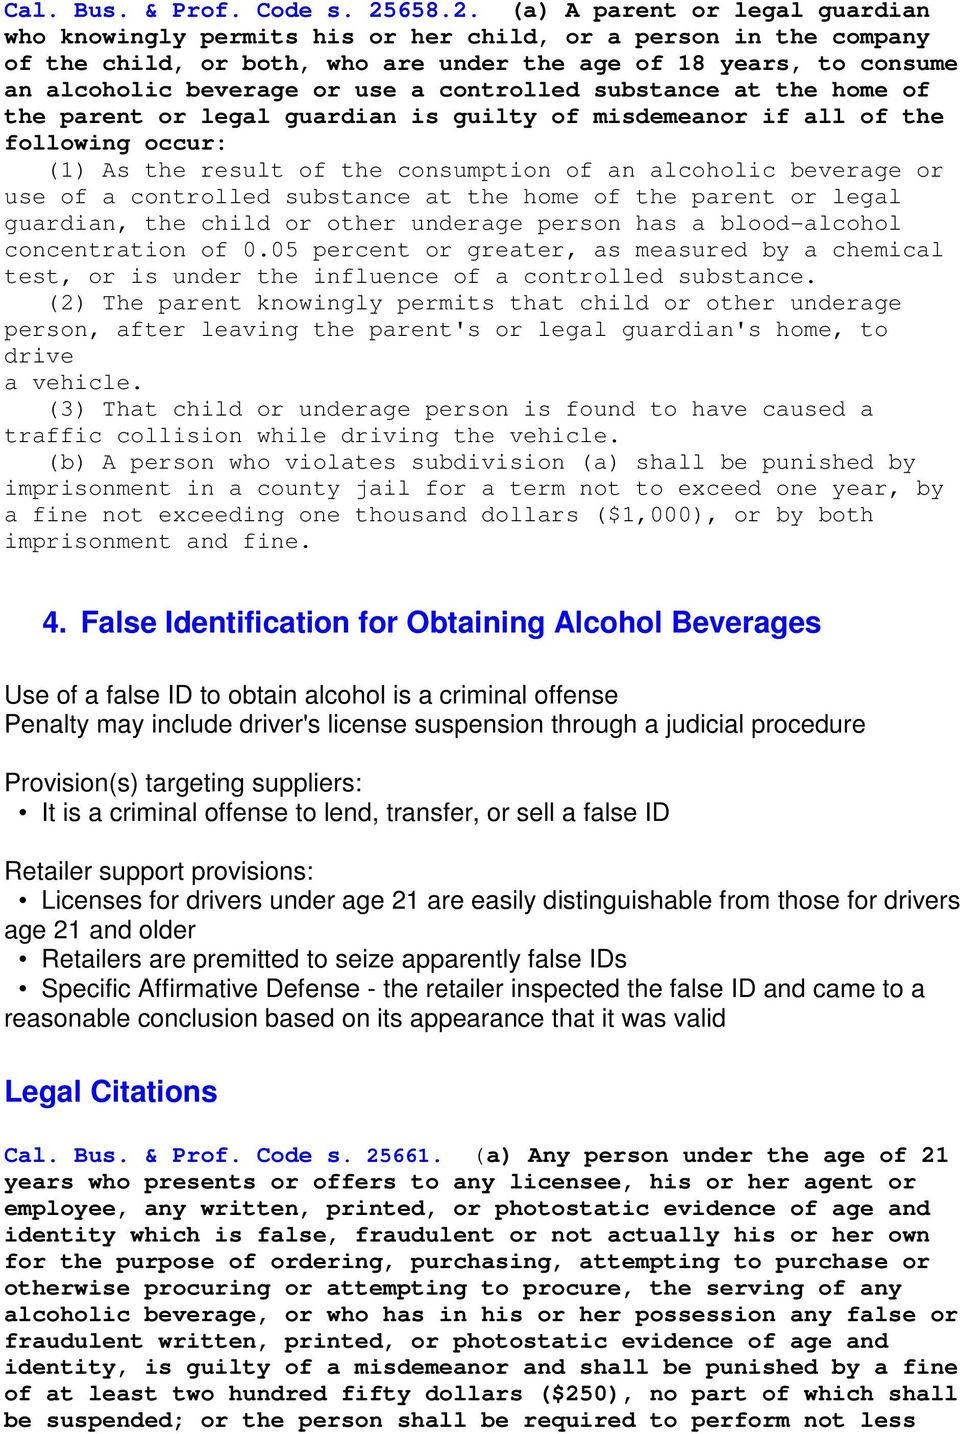 (a) A parent or legal guardian who knowingly permits his or her child, or a person in the company of the child, or both, who are under the age of 18 years, to consume an alcoholic beverage or use a